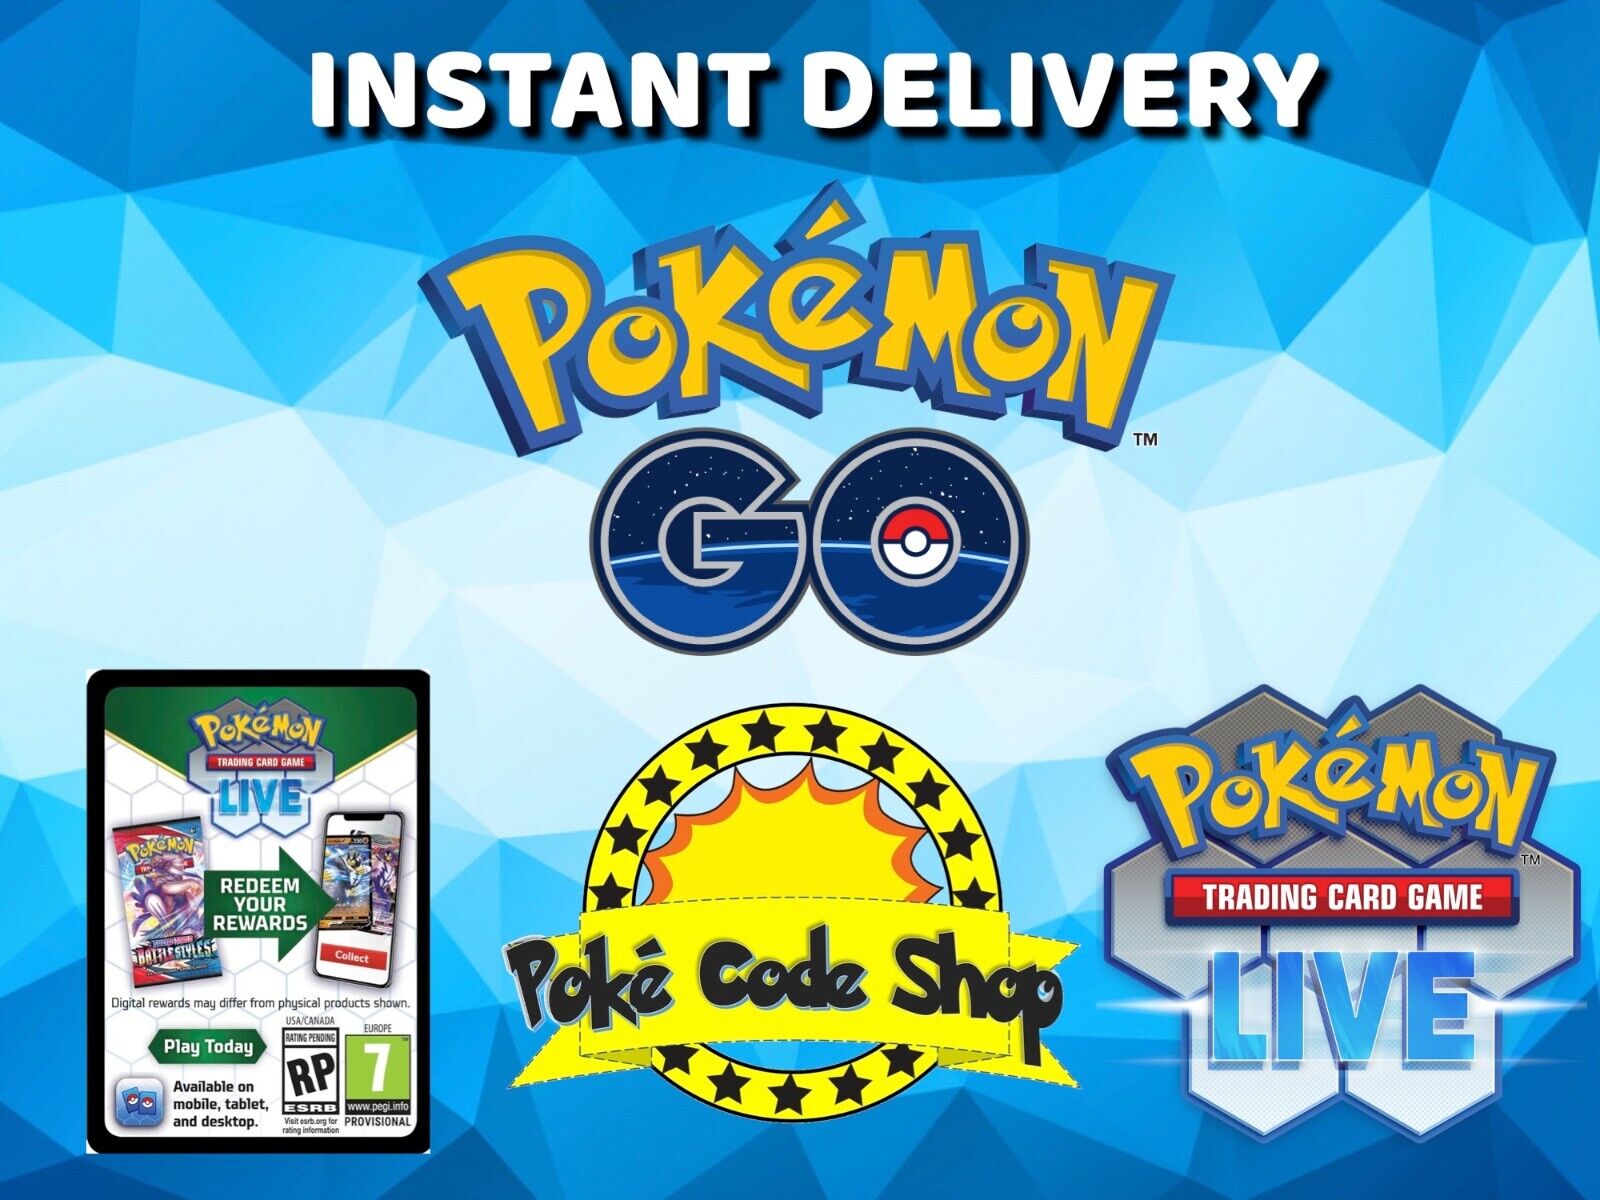 200 x POKEMON GO Live Pokemon Booster Codes Online INSTANT QR EMAIL DELIVERY